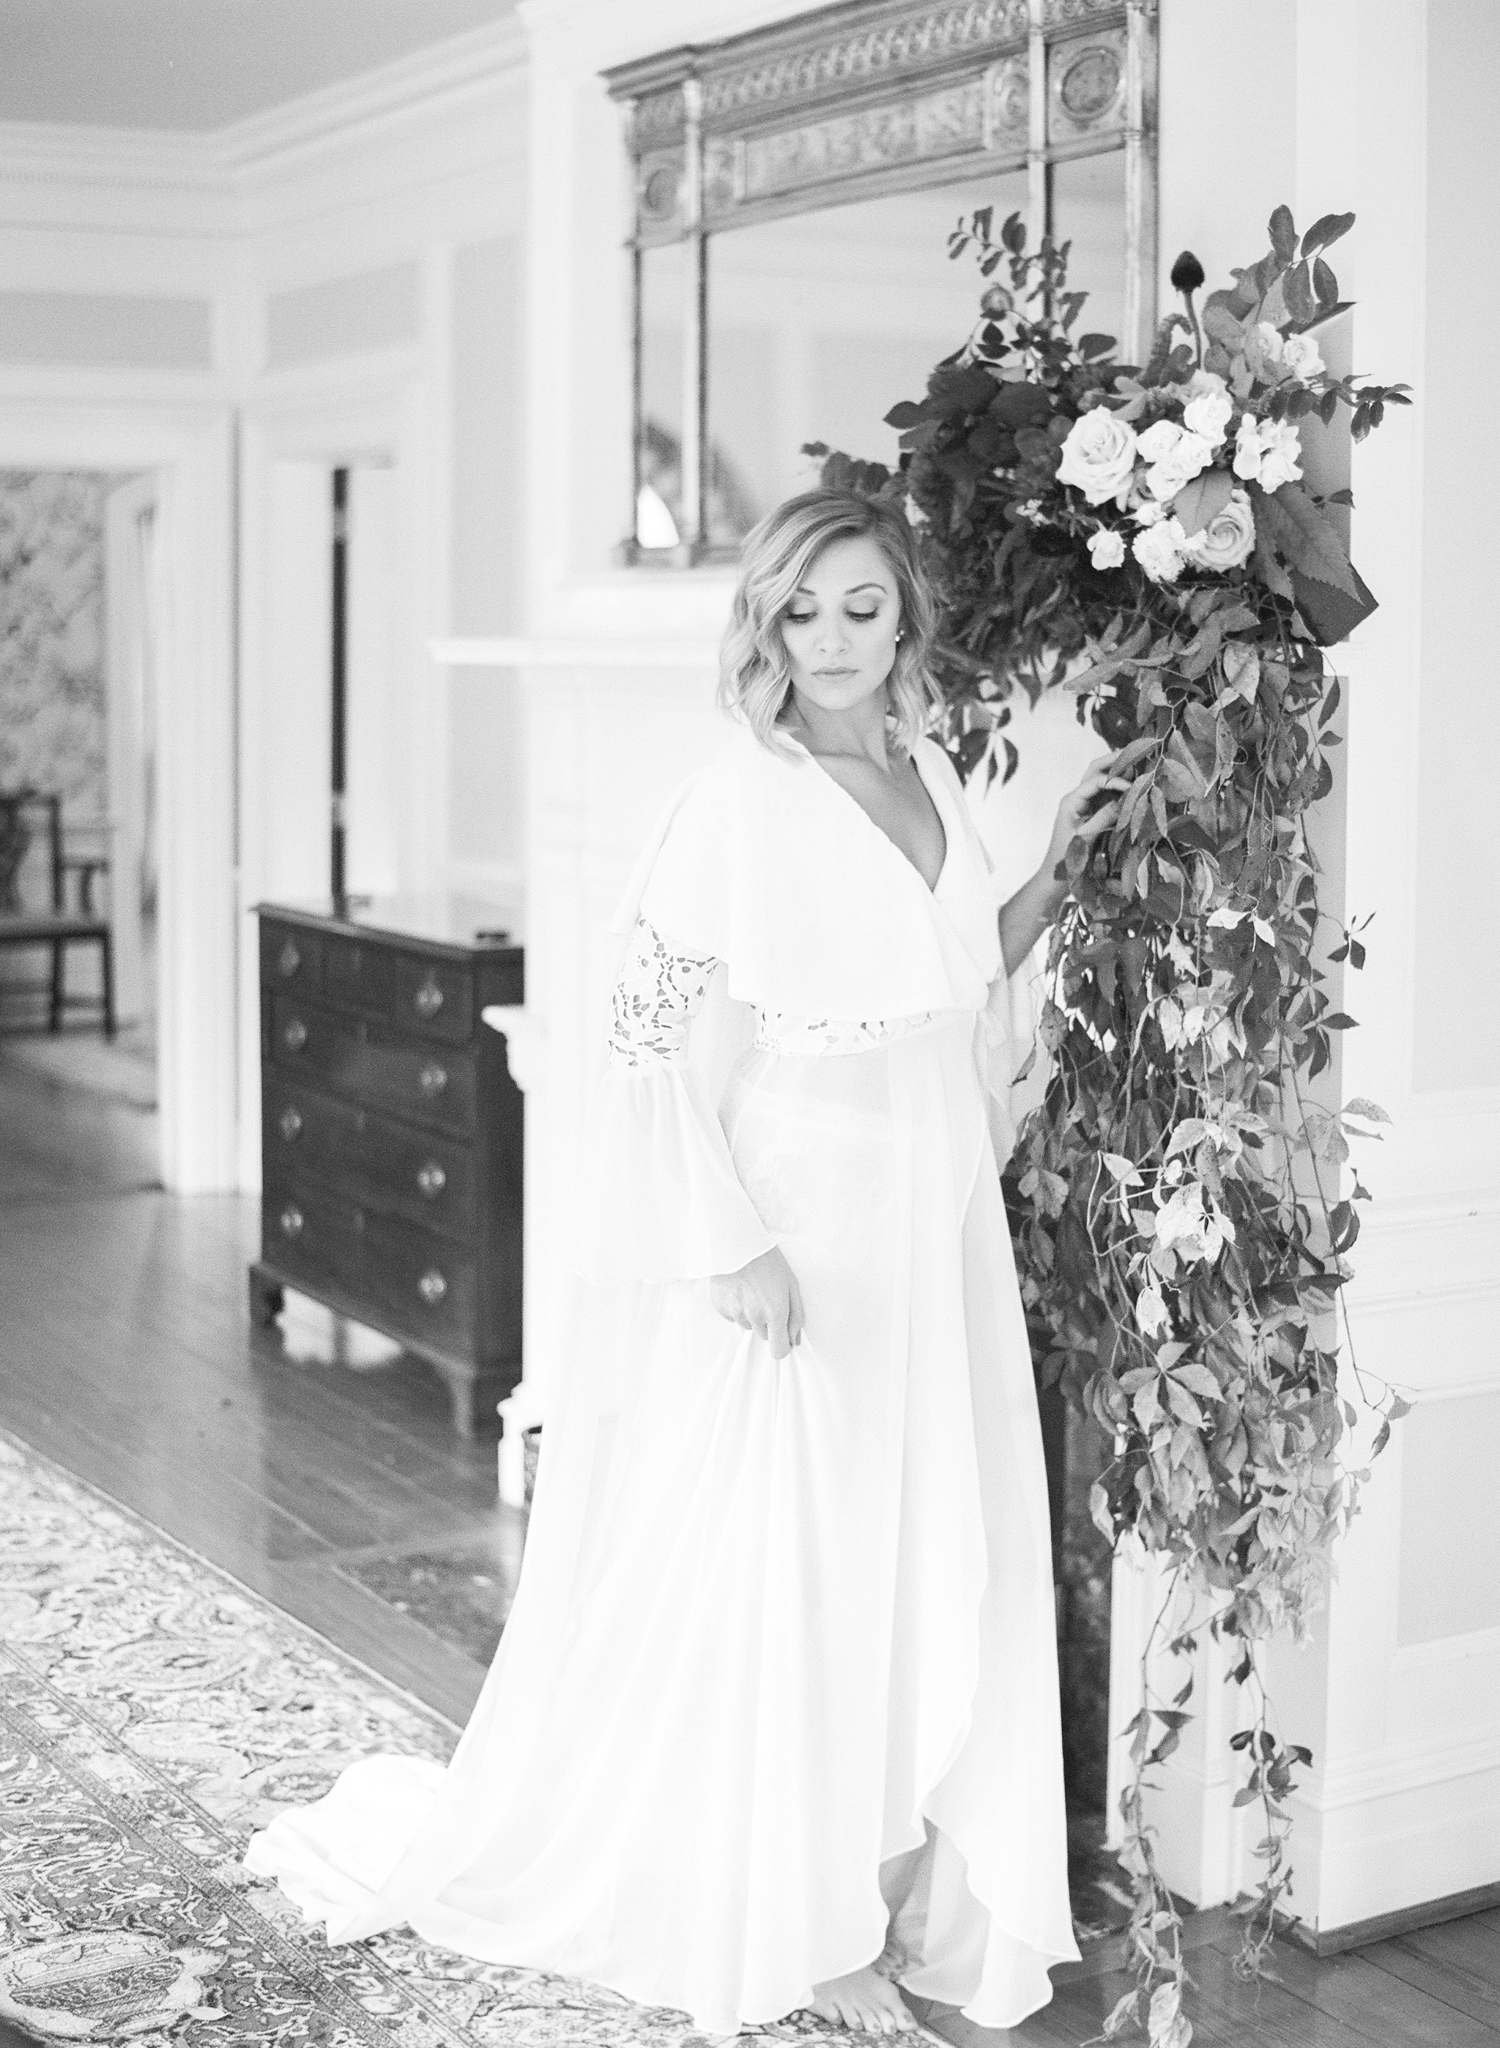 Legare Waring House Wedding Photography | Charleston Wedding Photographer | Charleston Film Photographer | Molly Carr Photography | The Petal Report | Emily Kotarski Bridal | Charleston Boudoir Photography | Bride Standing by Fireplace | Wedding Mantle Decor